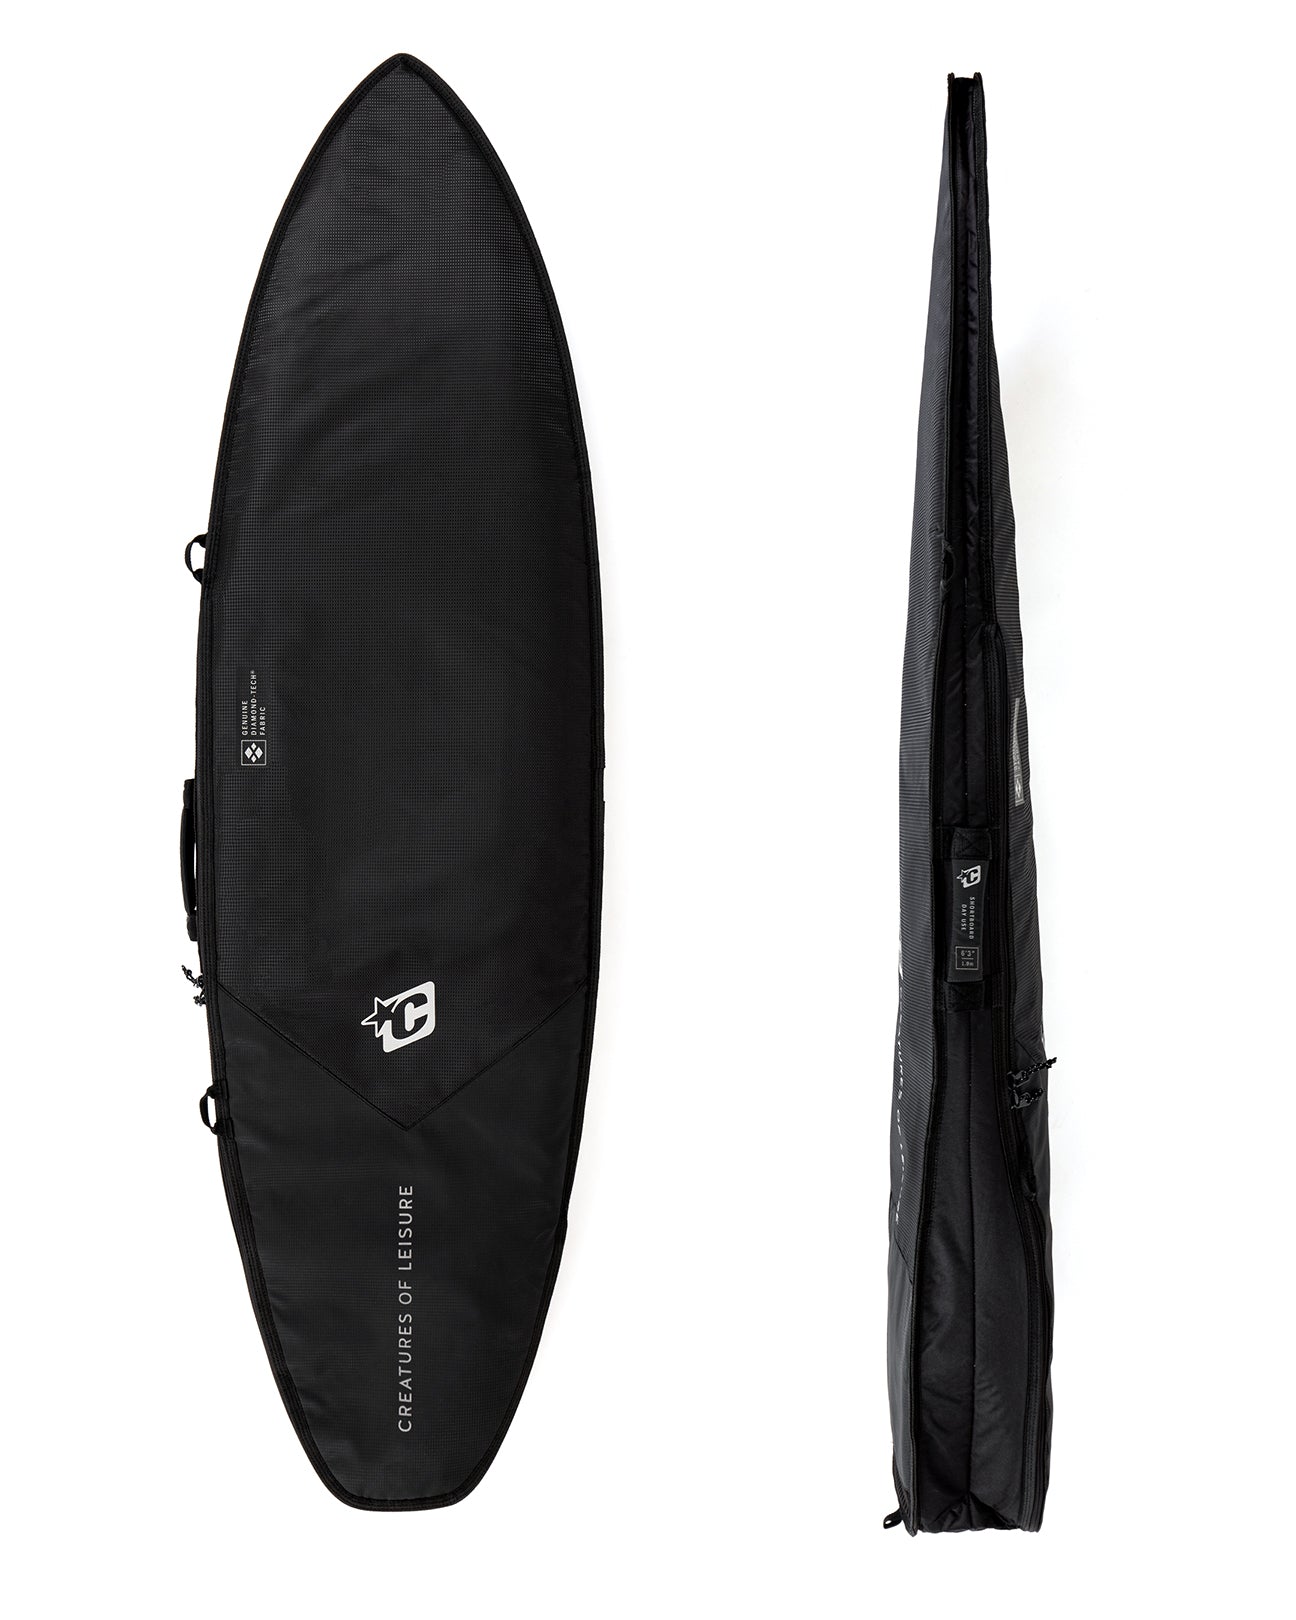 Creatures of Leisure Day Use DT2.0 Shortboard Boardbag Black-Silver 6ft7in